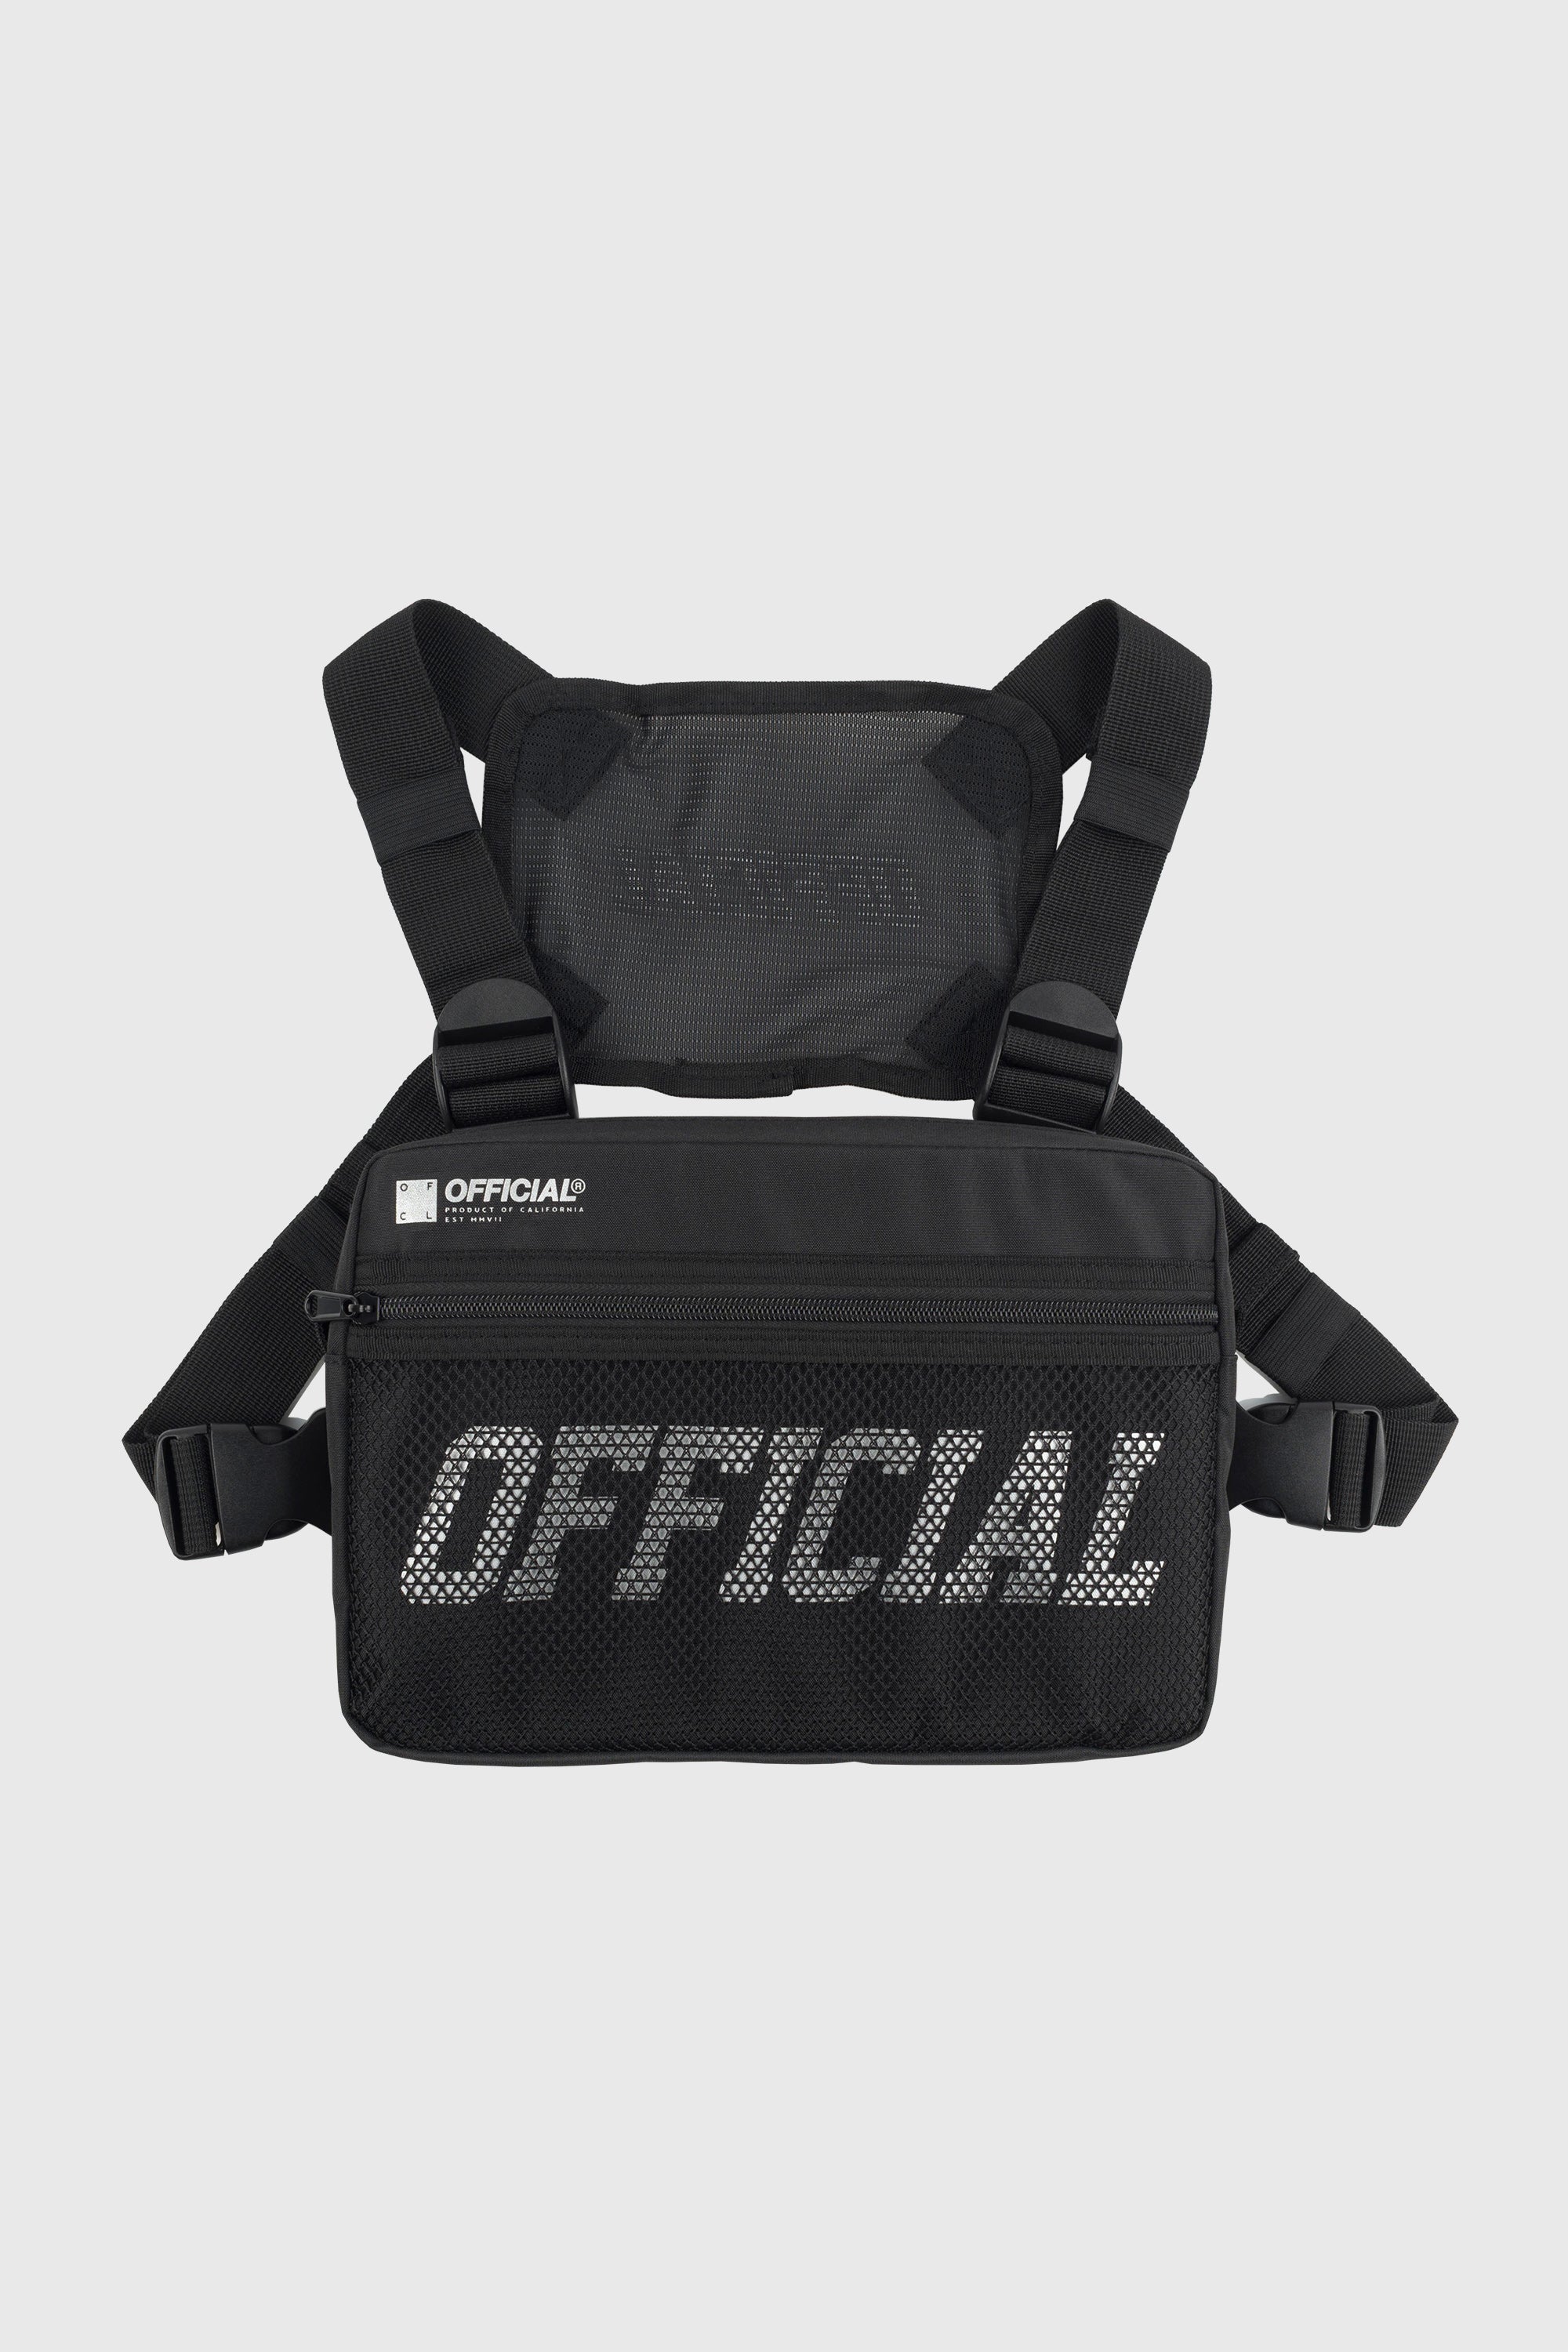 Chest Bags - The Official Brand